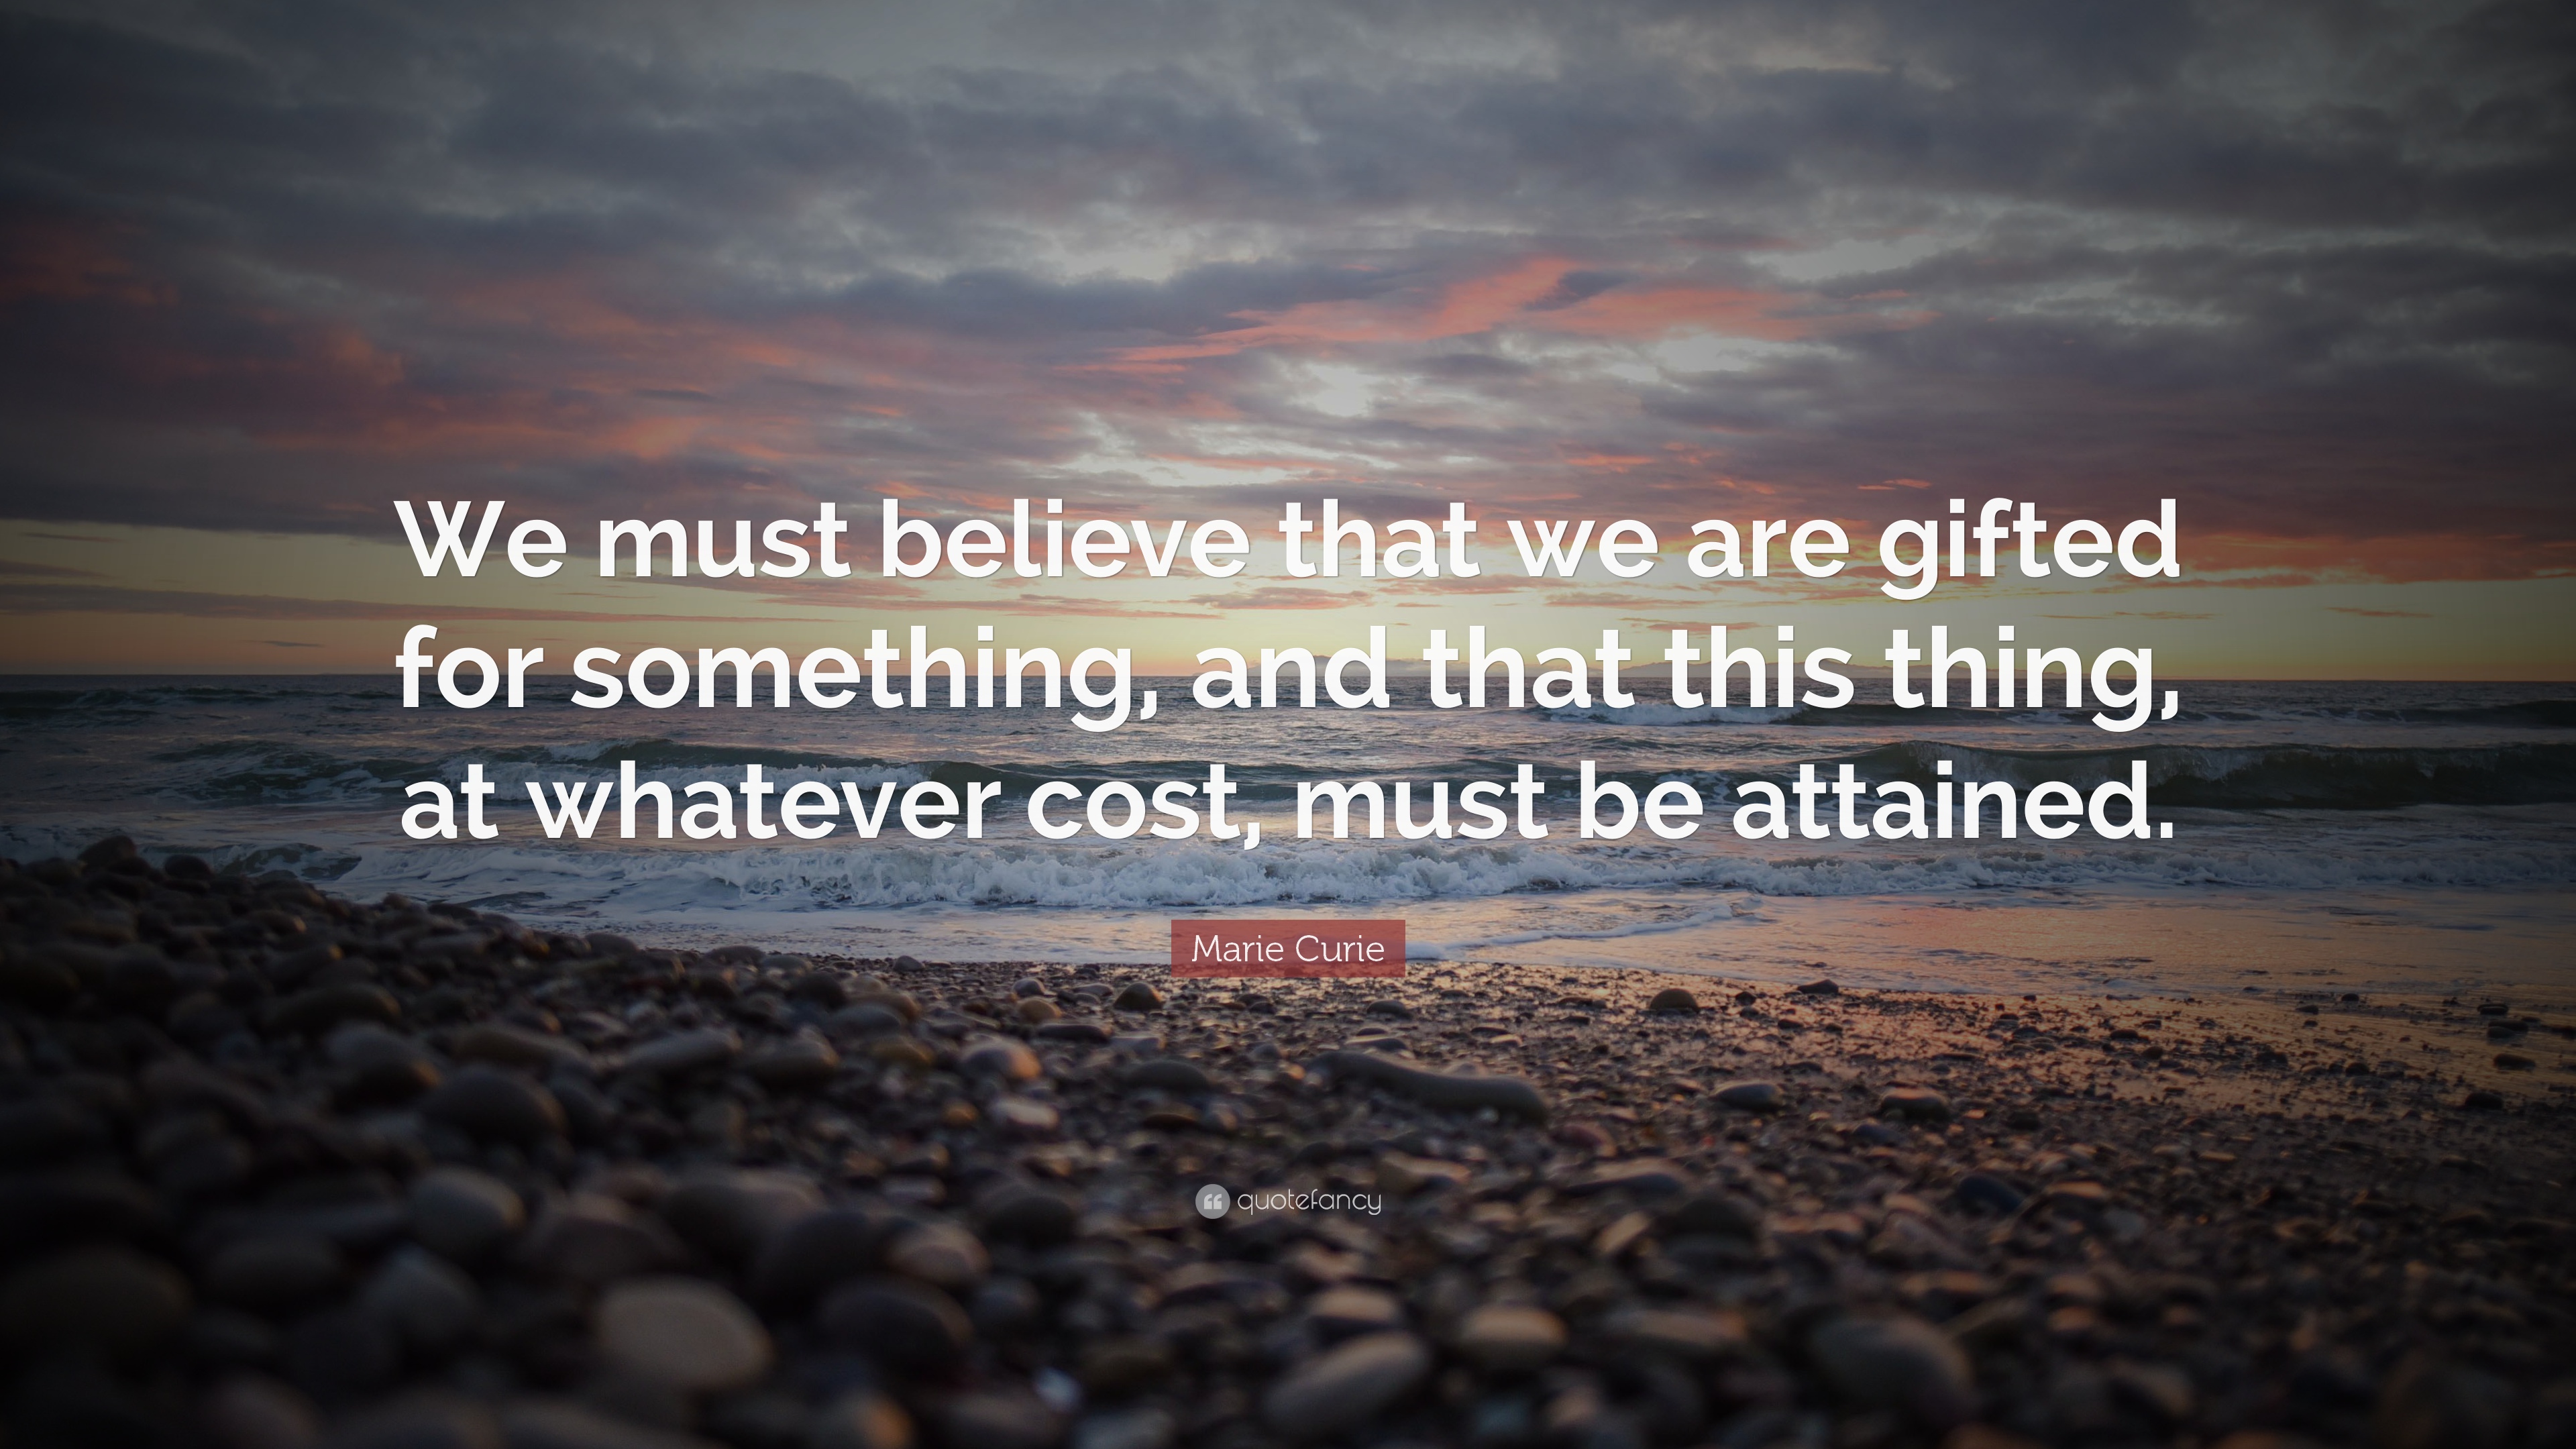 Marie Curie Quote: “We must believe that we are gifted